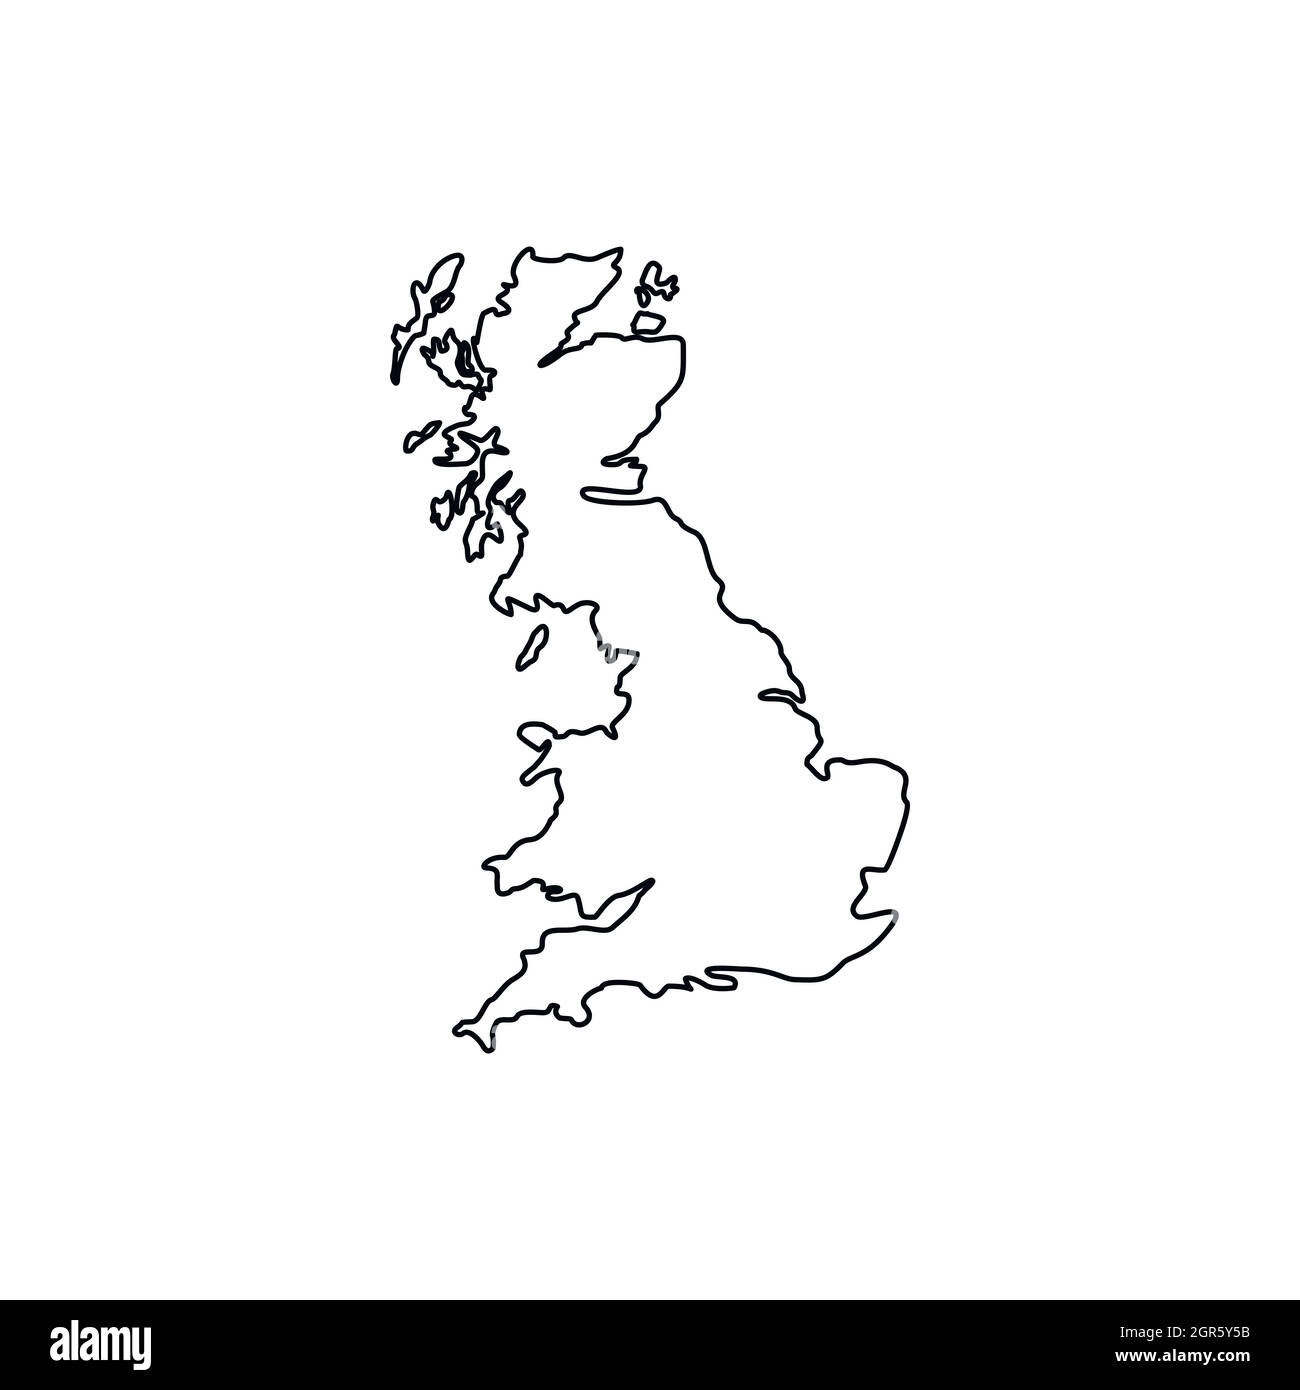 map-of-great-britain-icon-outline-style-stock-vector-image-art-alamy